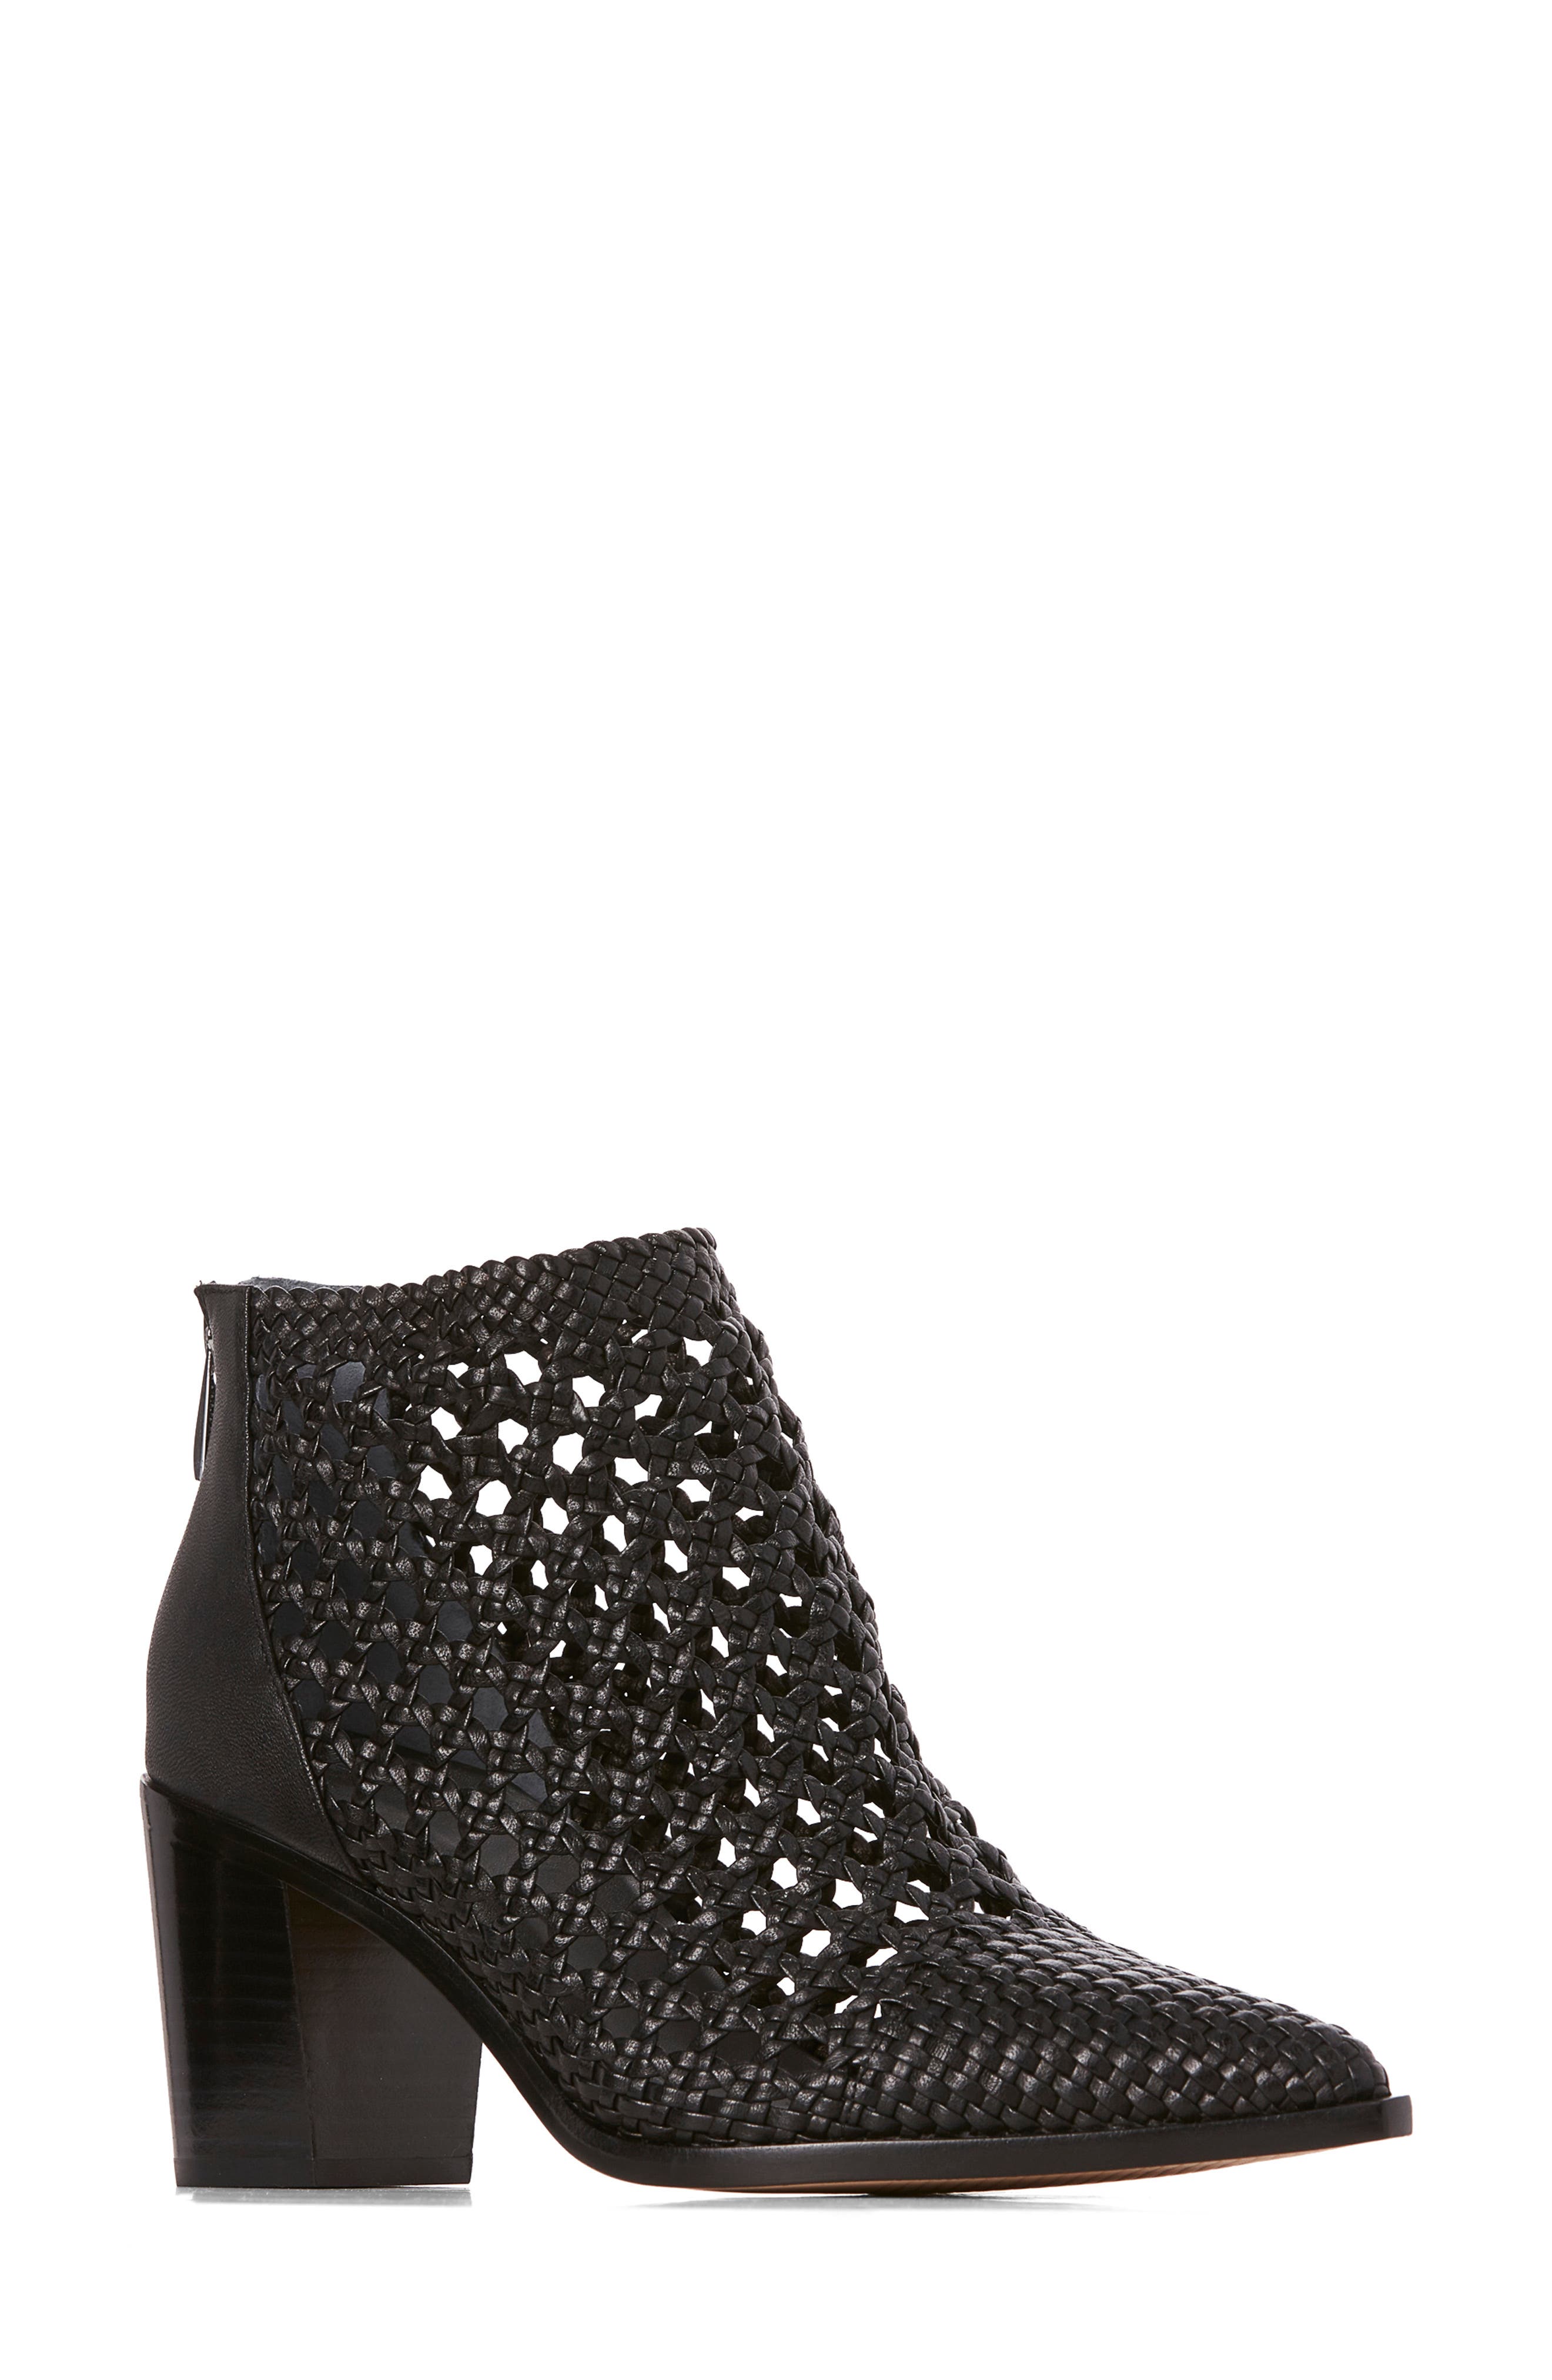 Buy > woven leather booties > in stock